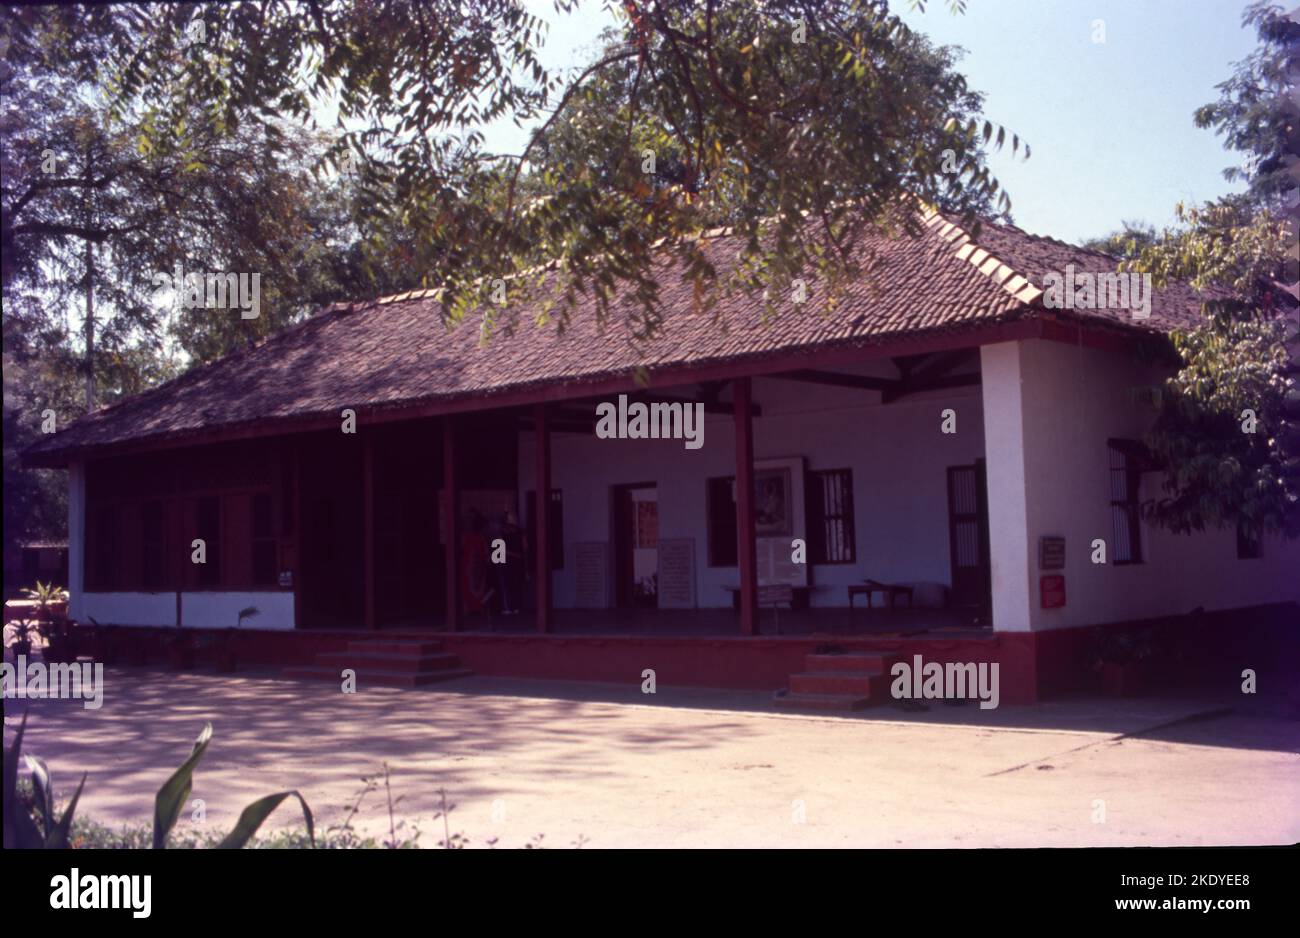 The Sabarmati Ashram in Ahmedabad was one of the residences of Mahatma Gandhi. It is situated on the banks of the Sabarmati river in Ahmedabad. Gandhiji and his wife Kasturba lived here from 1917 and 1930. Stock Photo